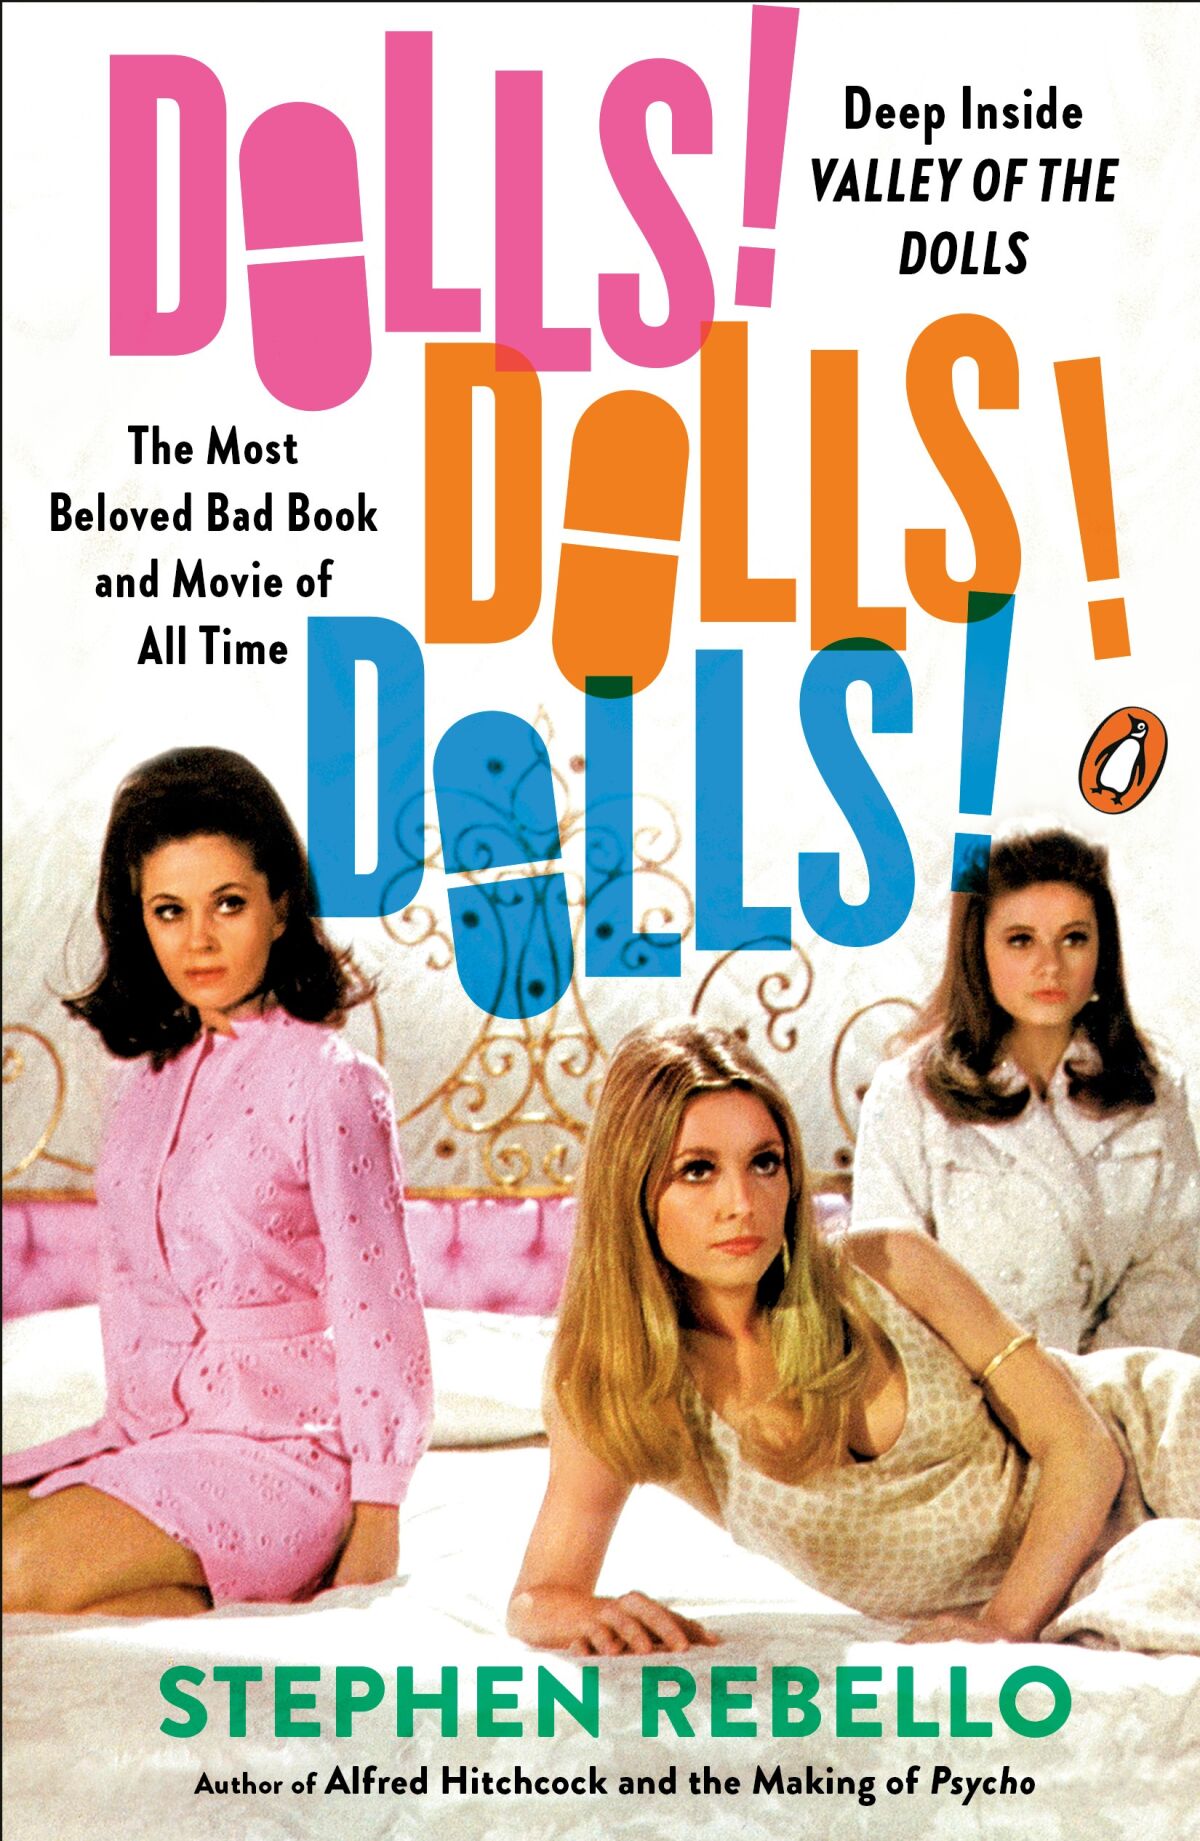 A book cover for "Dolls! Dolls! Dolls!," by Stephen Rebello. Credit: Penguin Books